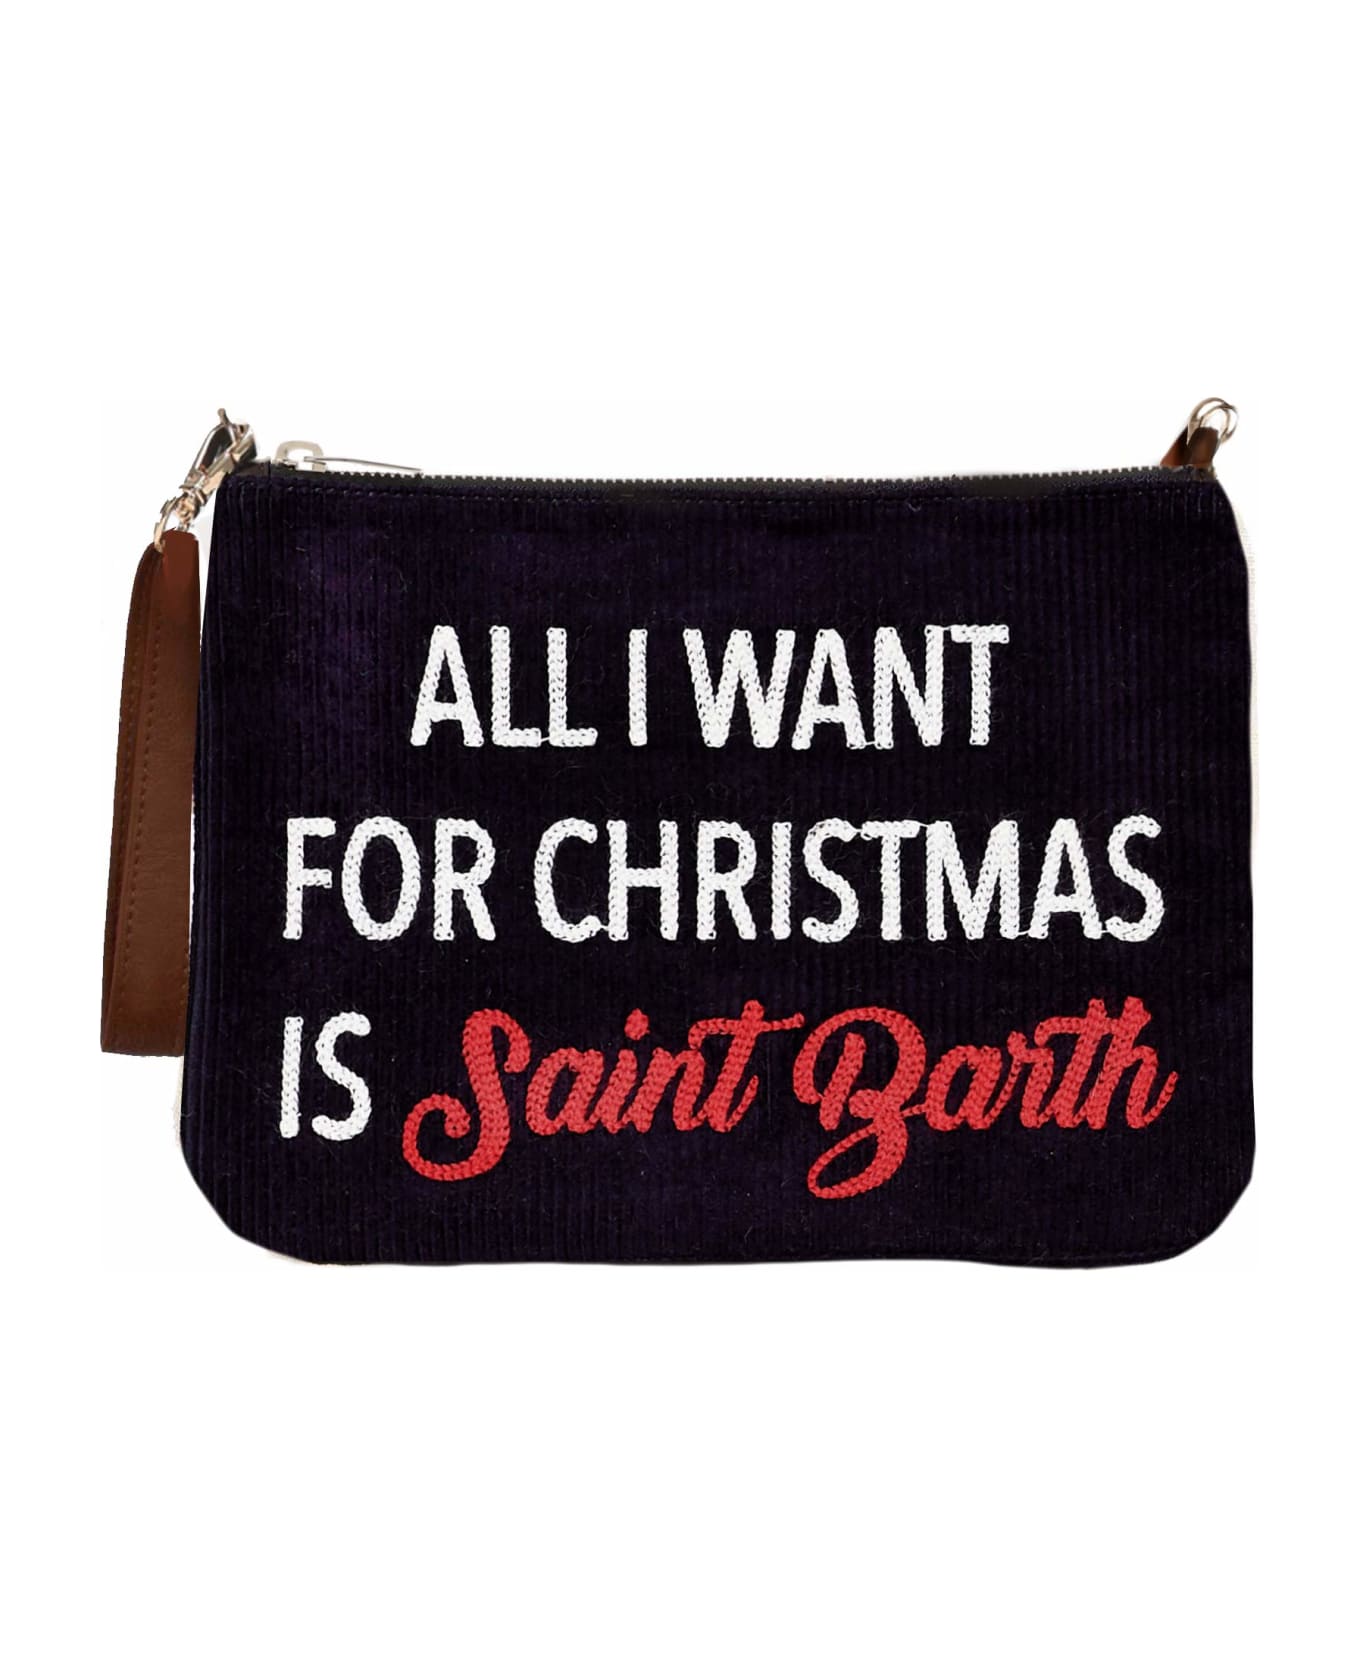 MC2 Saint Barth Parisienne Velvet Cross-body Pouch Bag With All I Want For Christmas Is Saint Barth Embroidery - BLUE トラベルバッグ